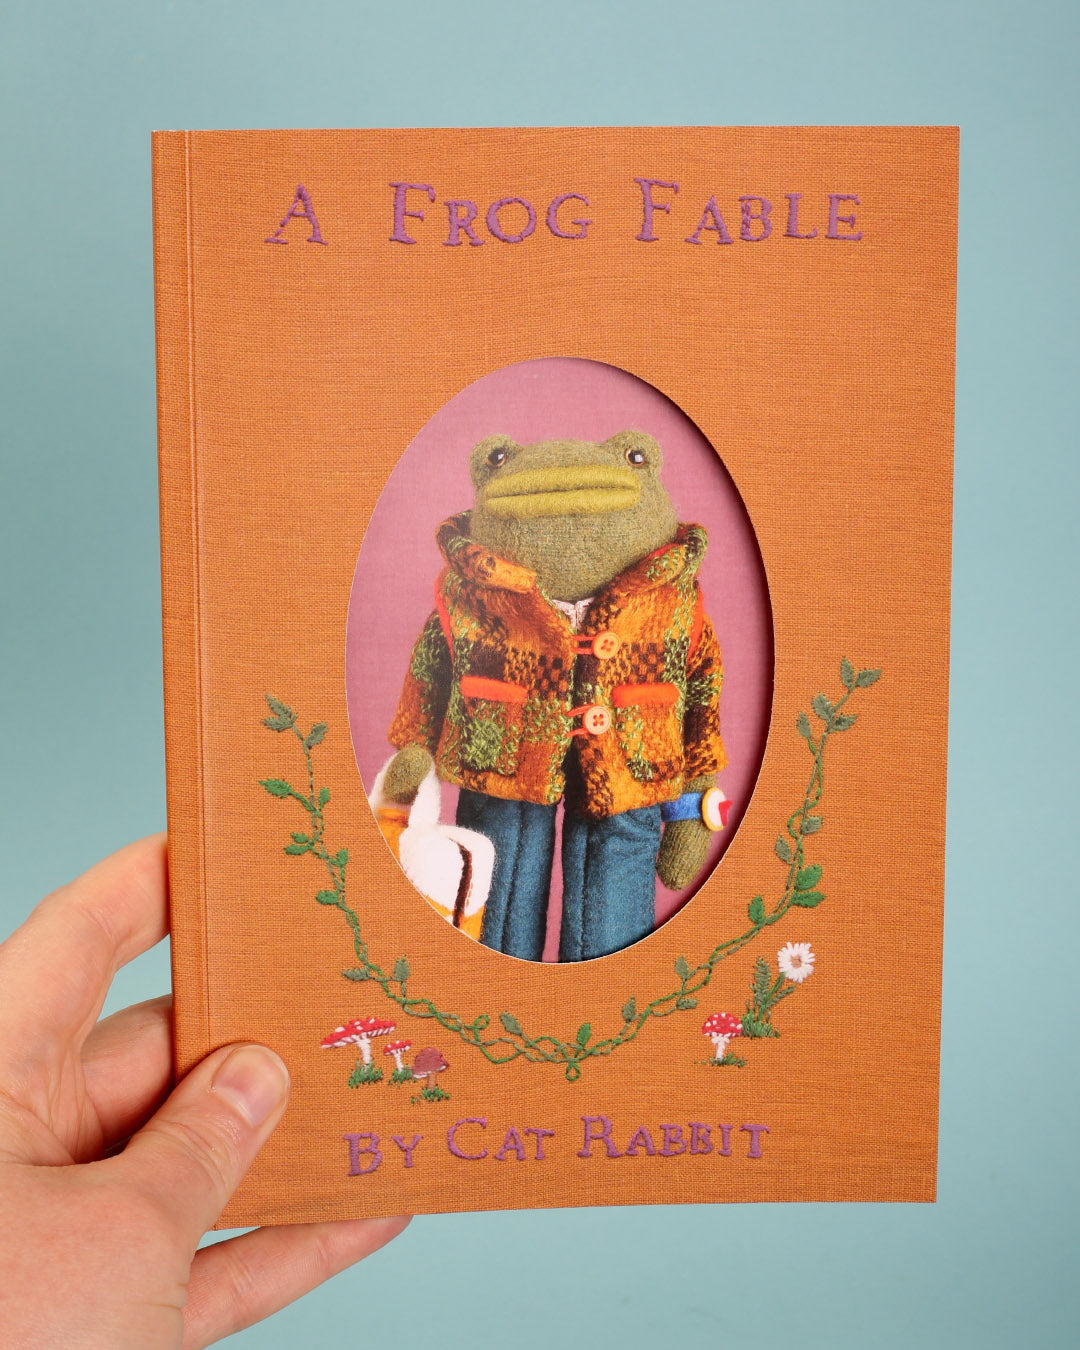 Cat Rabbit - A Frog Fable Book